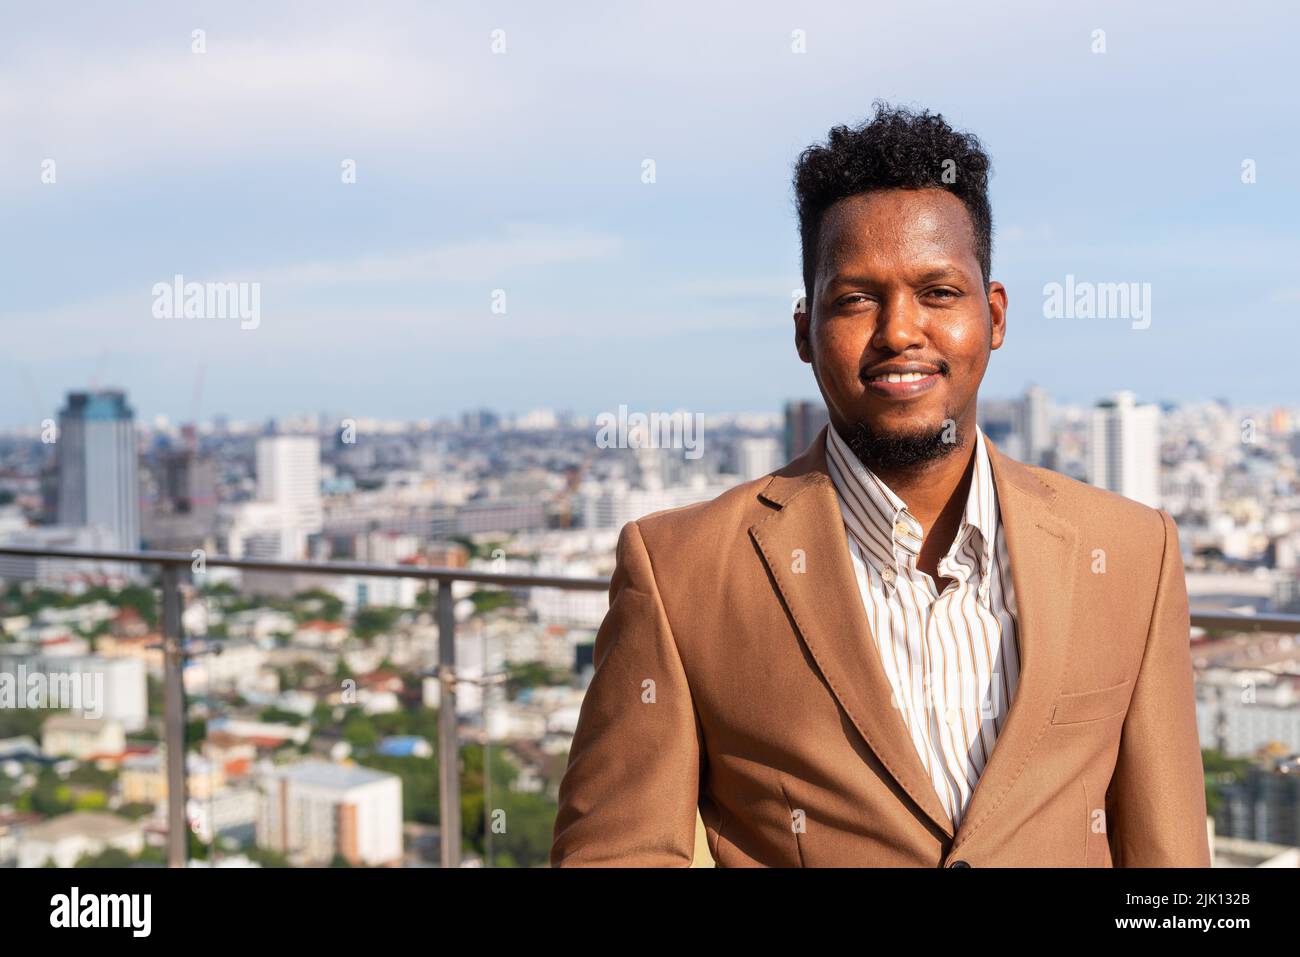 Portrait of handsome young African man Stock Photo